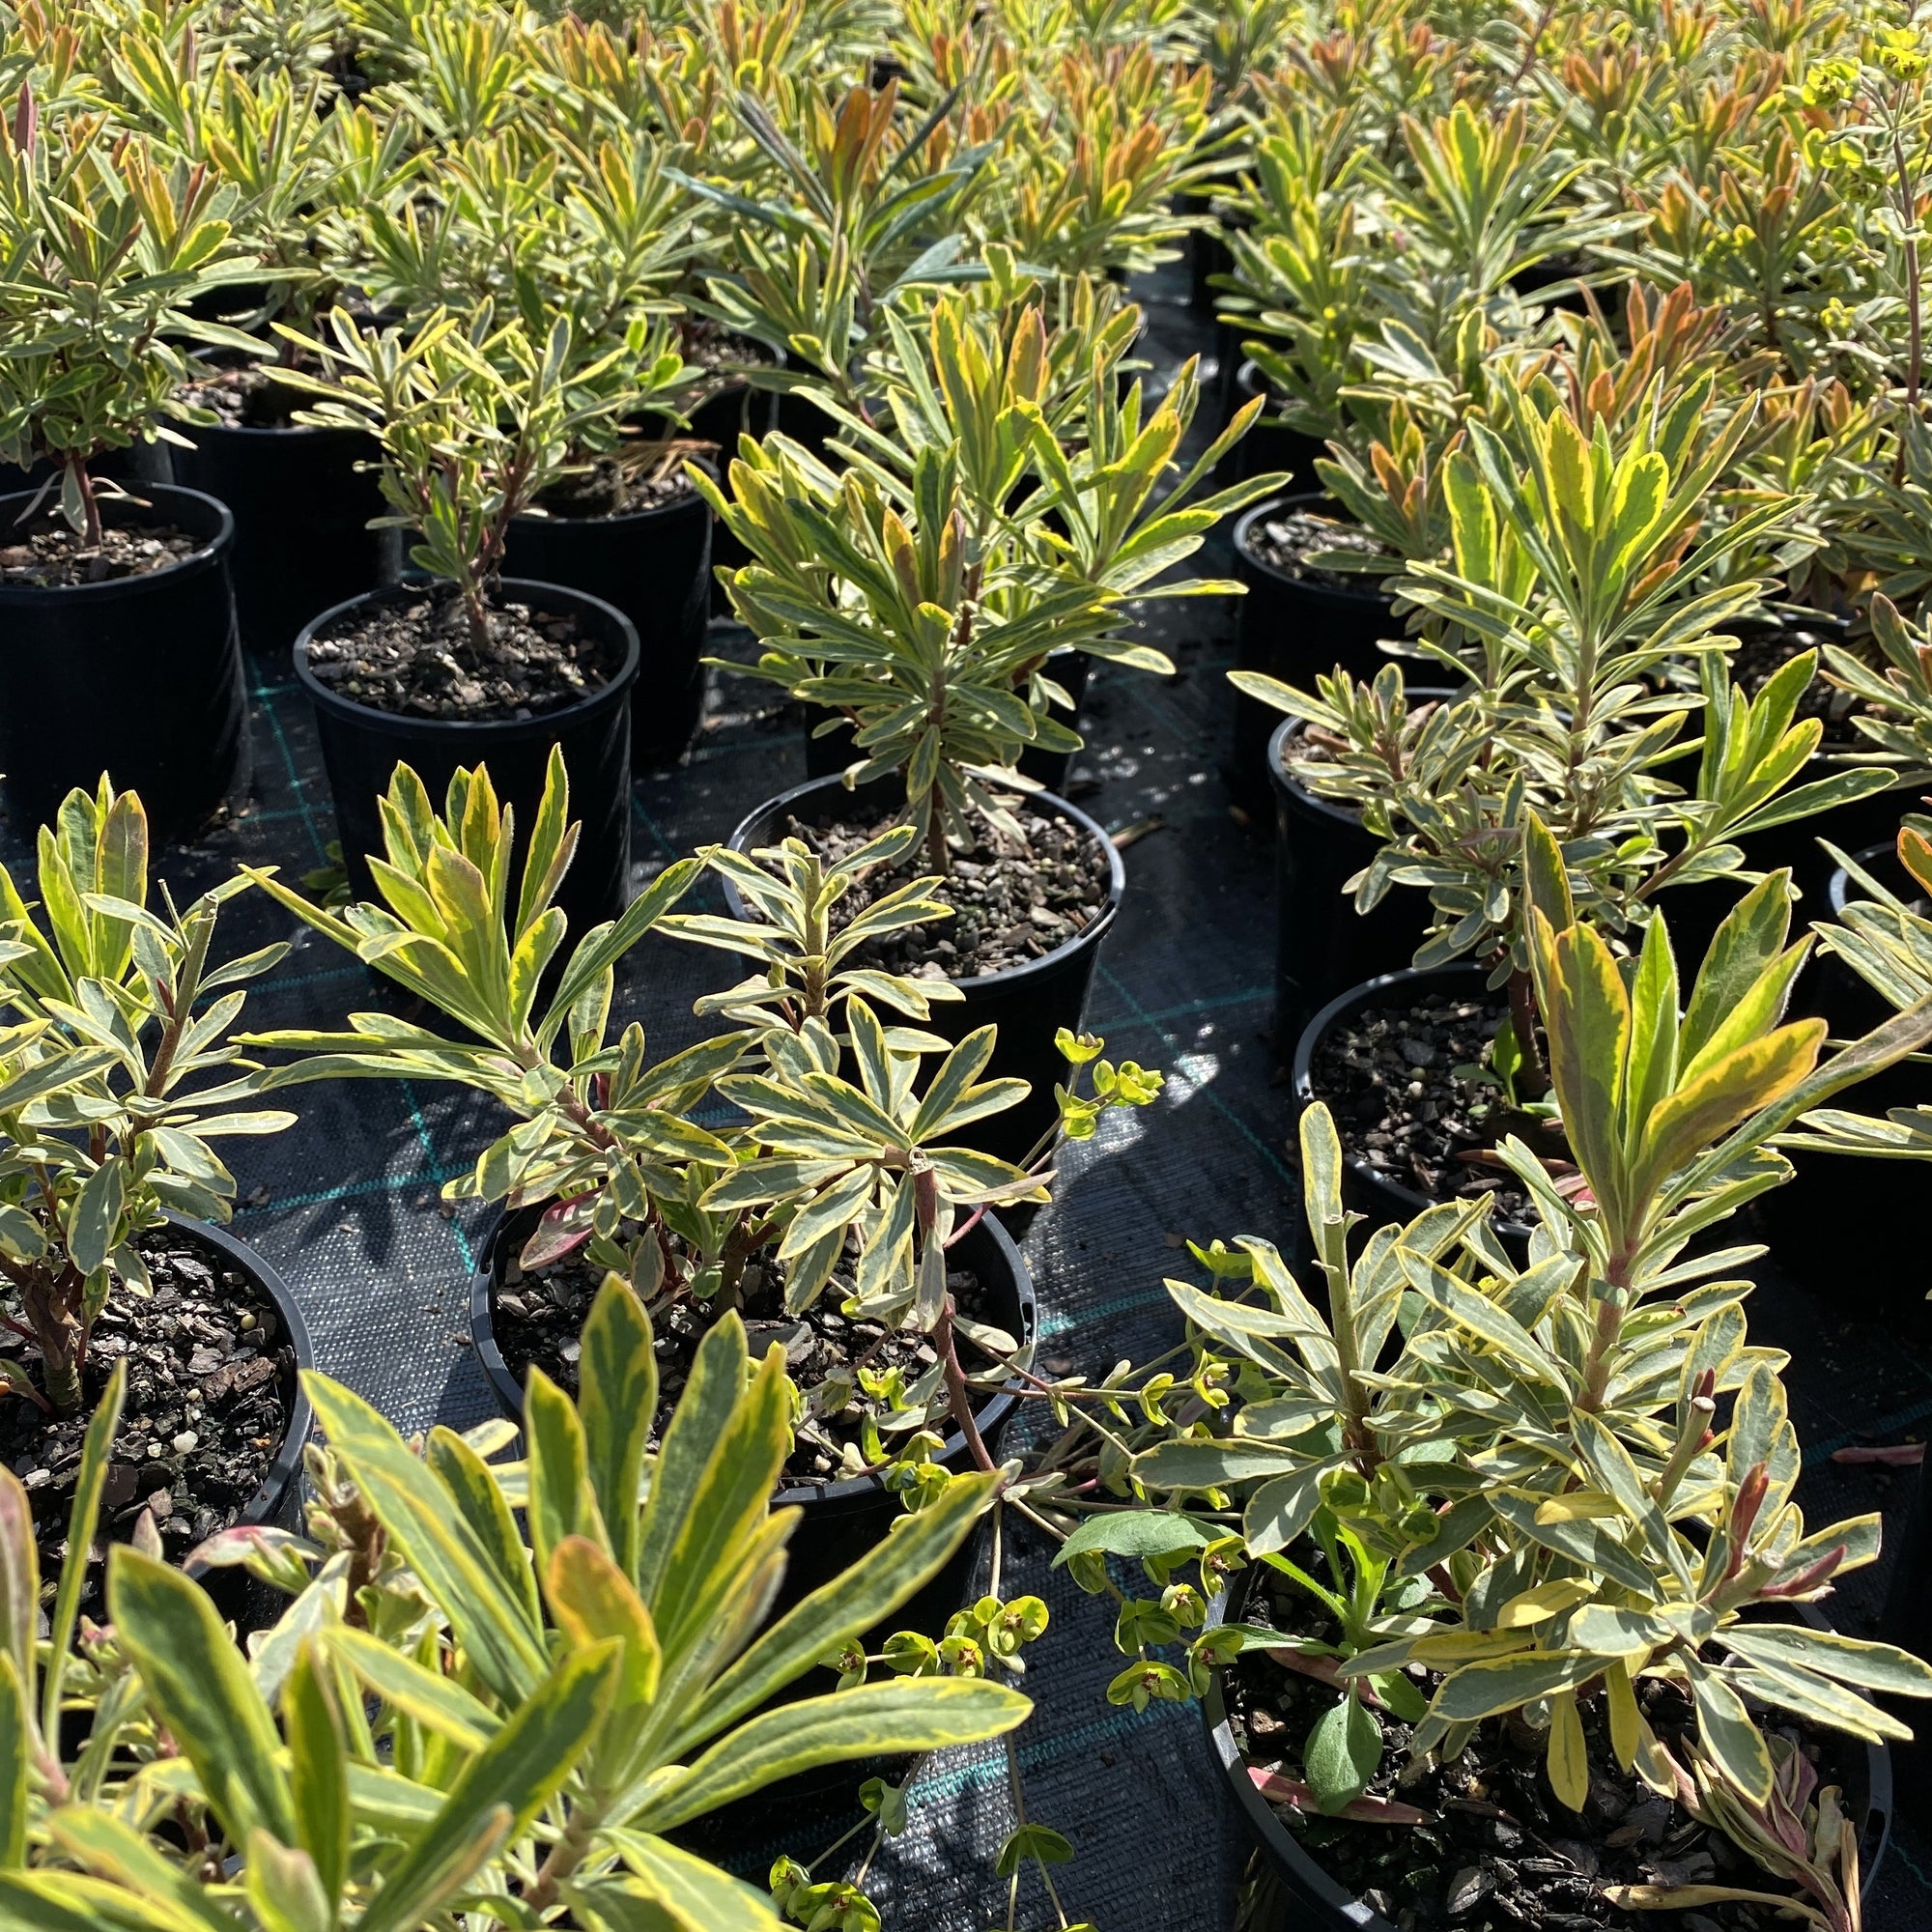 Euphorbia Rainbow foliage is phenomenal and looked fantastic in the garden from spring through fall